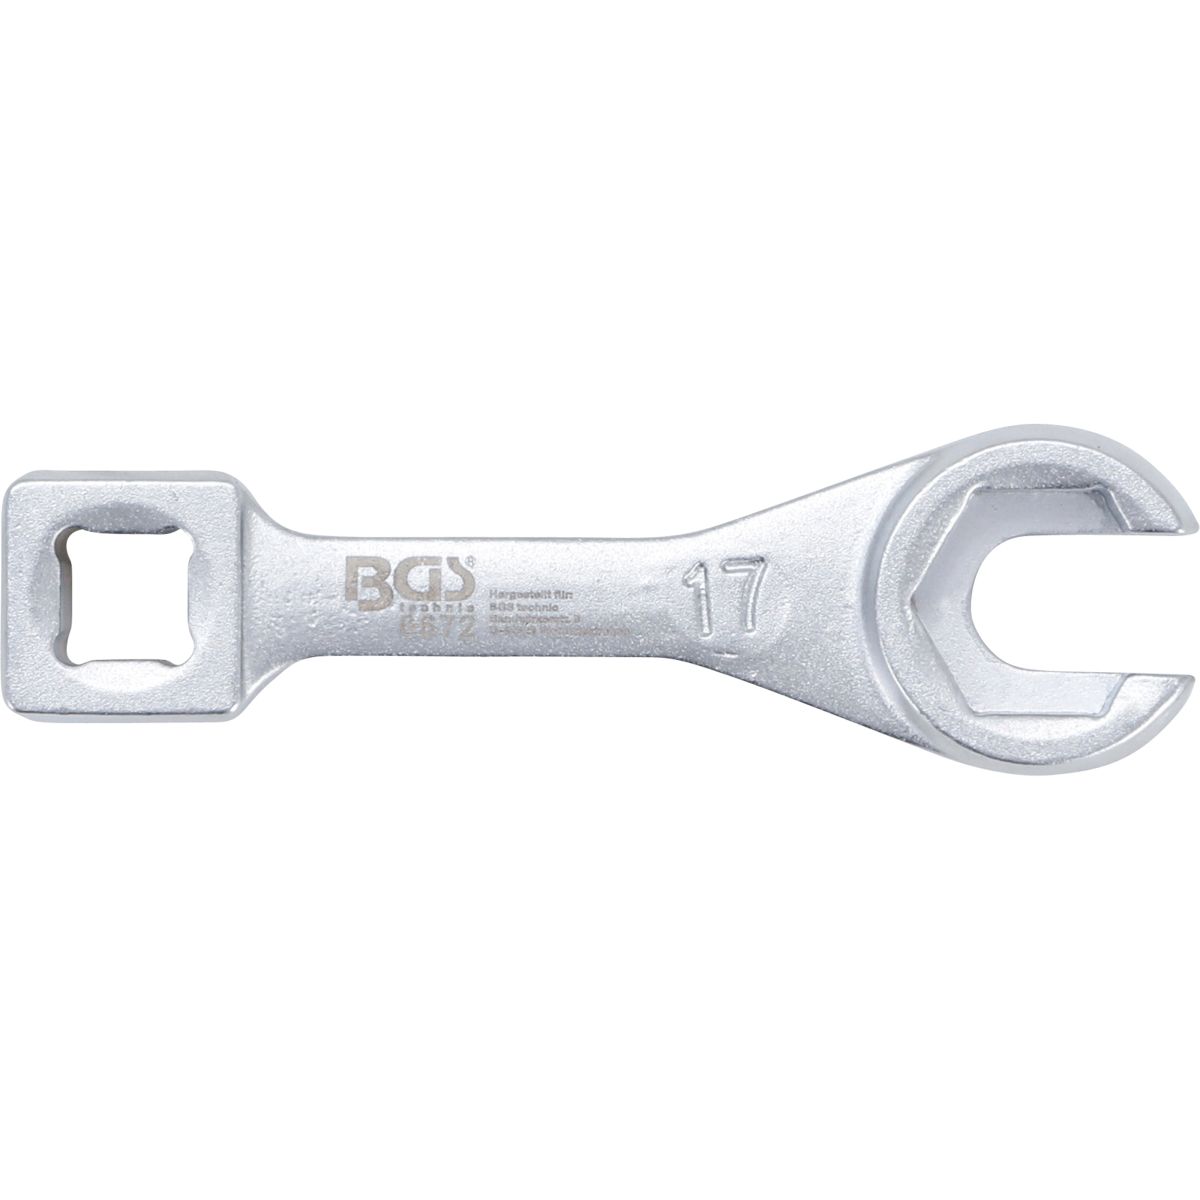 Fuel Pipe Wrench | for Toyota & Honda | 17 mm